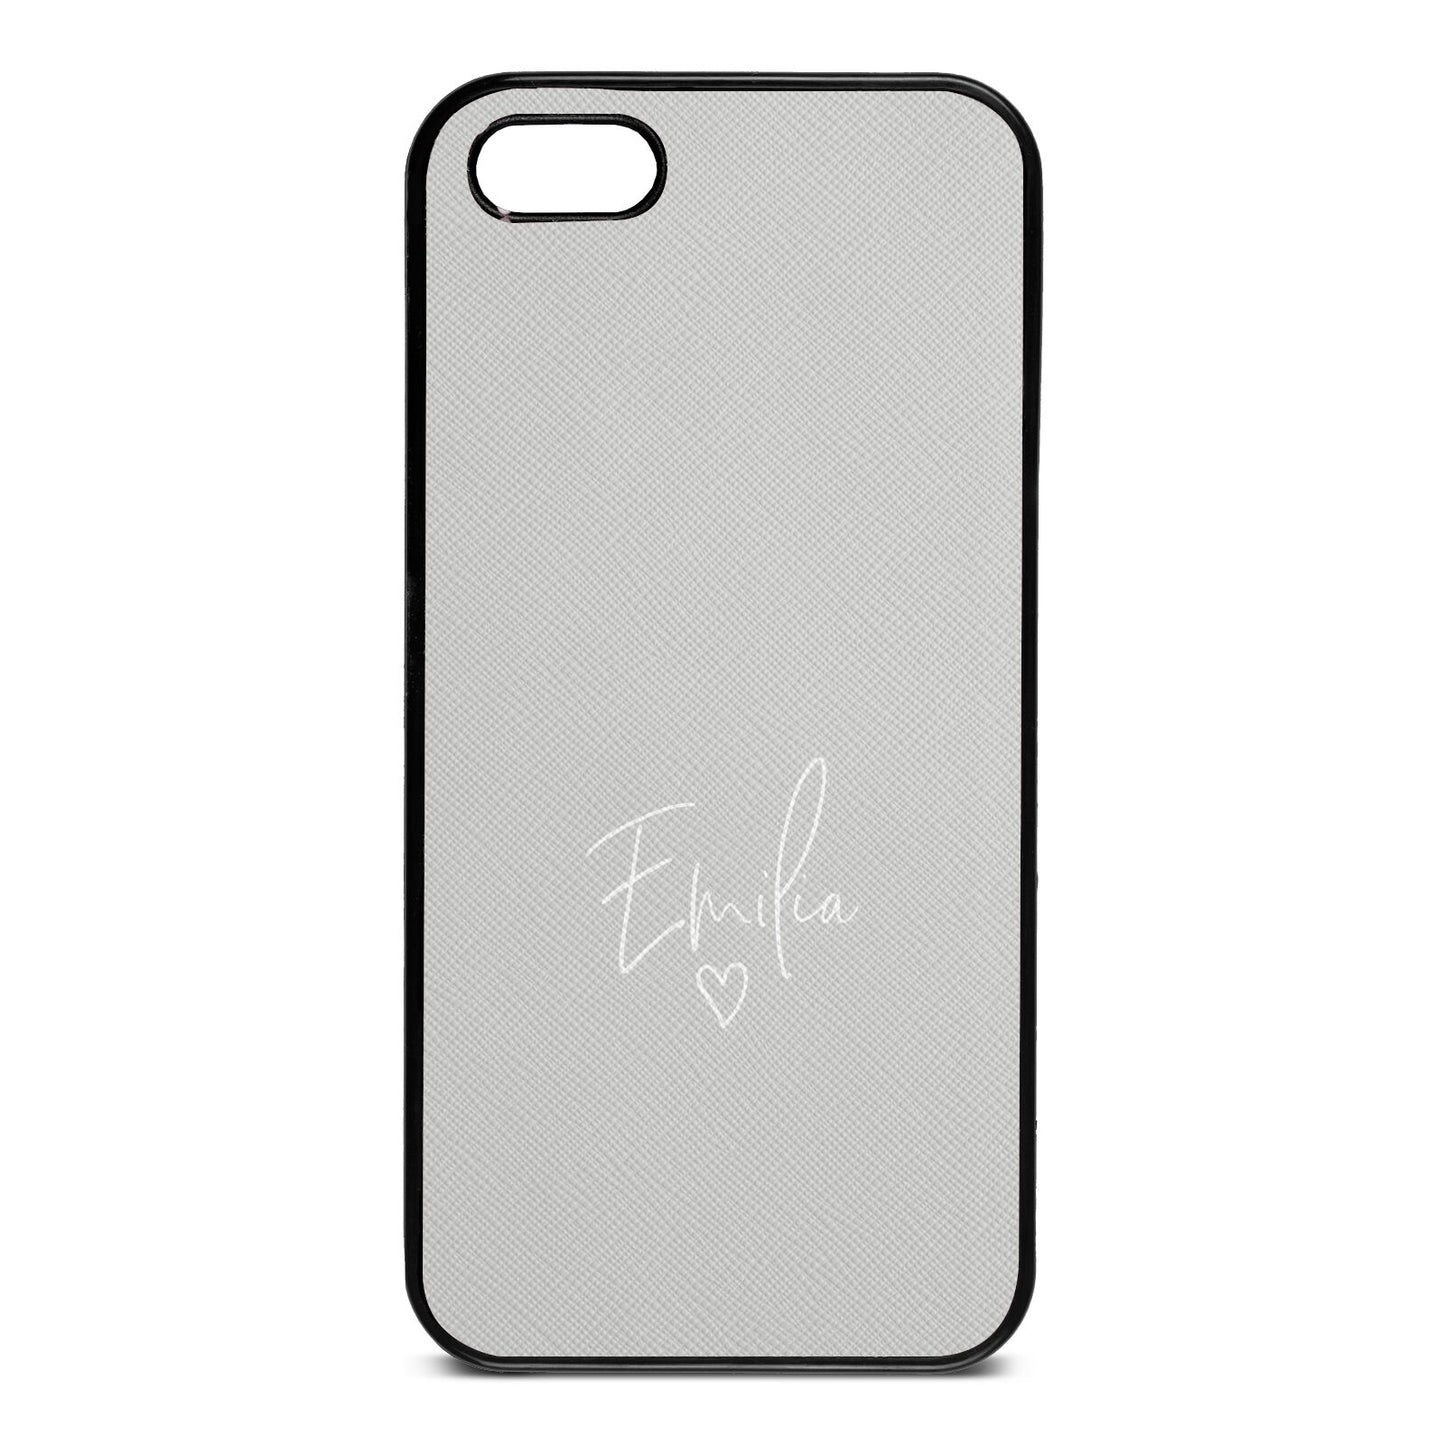 White Handwritten Name Transparent Silver Saffiano Leather iPhone 5 Case